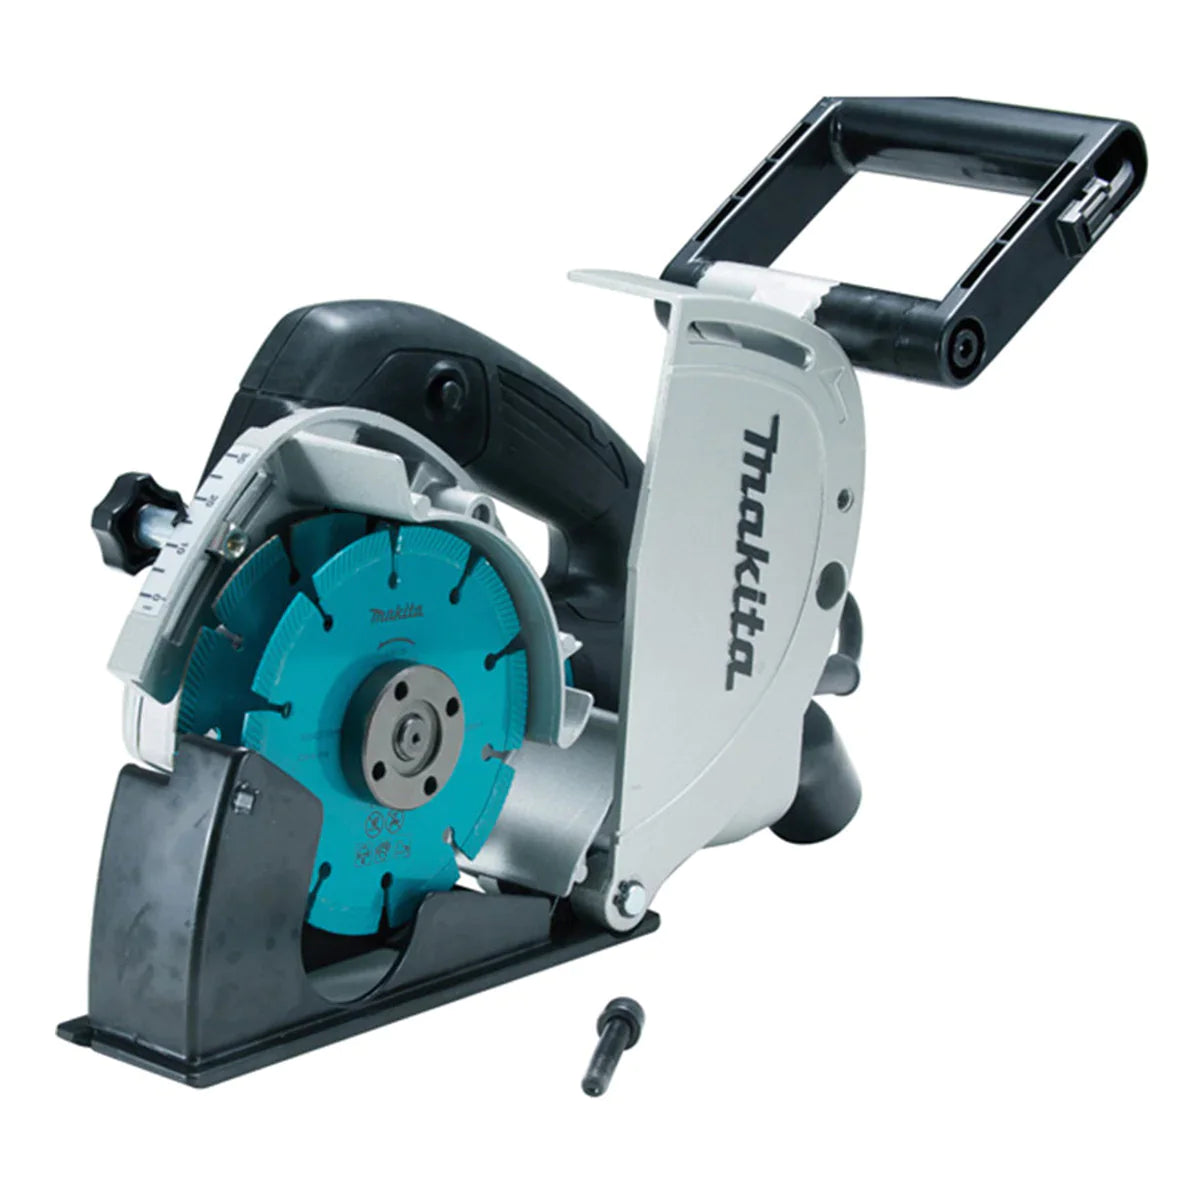 125mm Concrete wall chaser saw 1400W 10000rpm 30mm-Cut